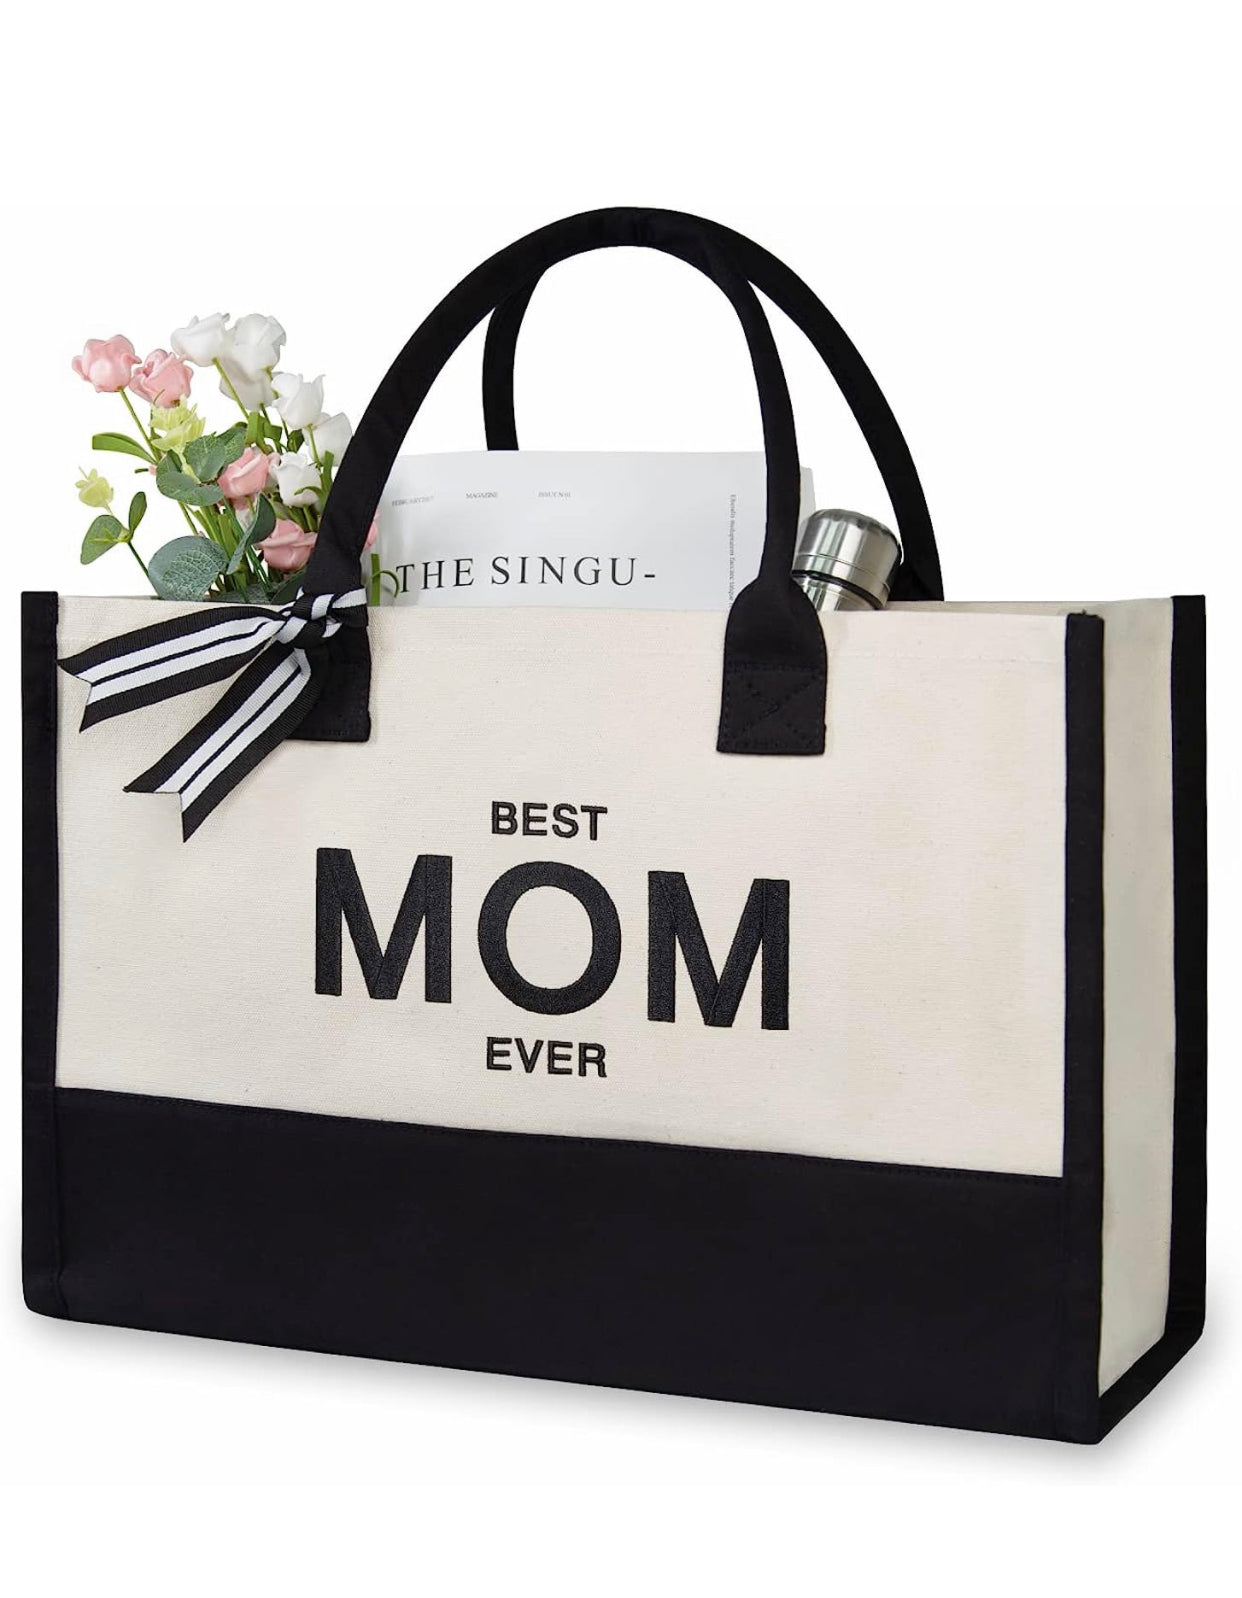 Best Mom Ever Canvas Tote Bag With Leather Straps